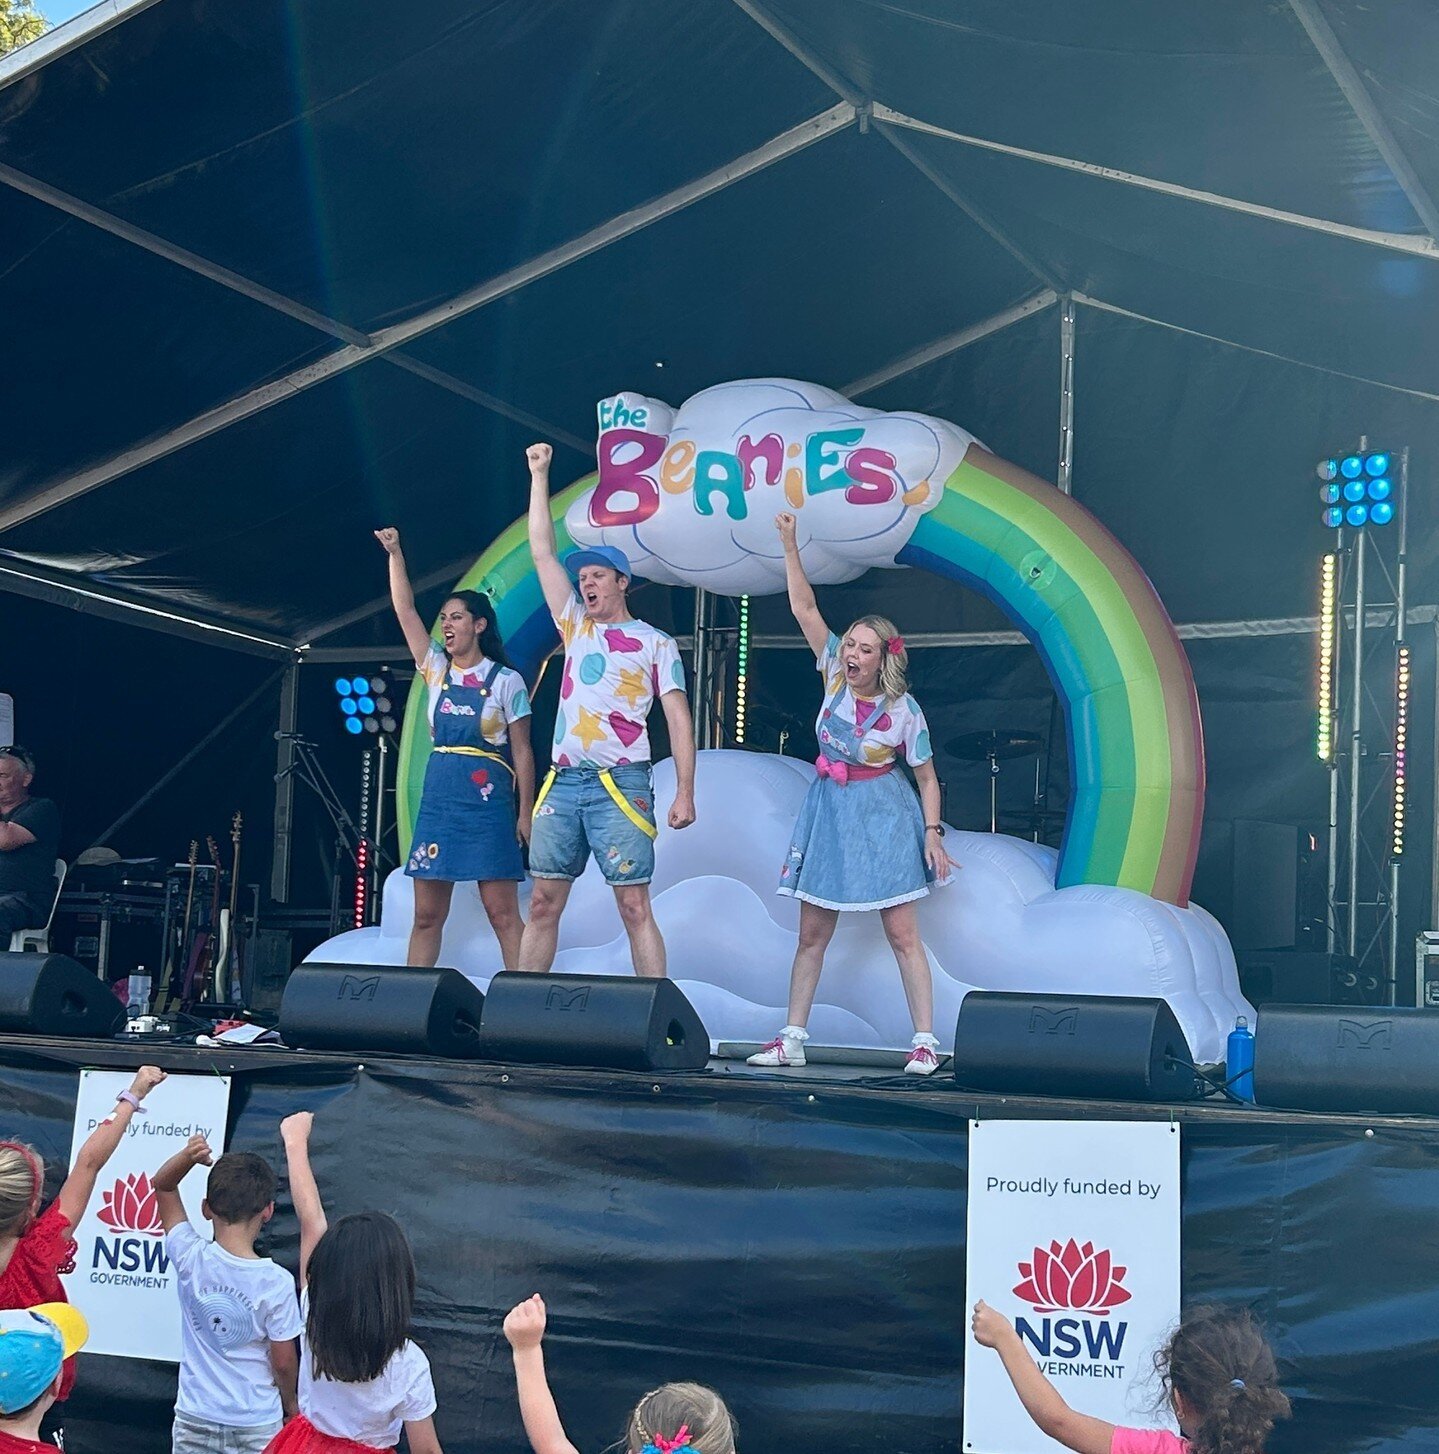 Hands up if we're seeing you at @thegumballfestival tomorrow! ⁠
⁠
Can't wait to have a boogie with you bright and early at 9:40am ☀️⁠
⁠
#gumballfestival #dashville #newcastle #kidsband #childrensentertainment #liveshow #musicforkids #kidsentertainmen